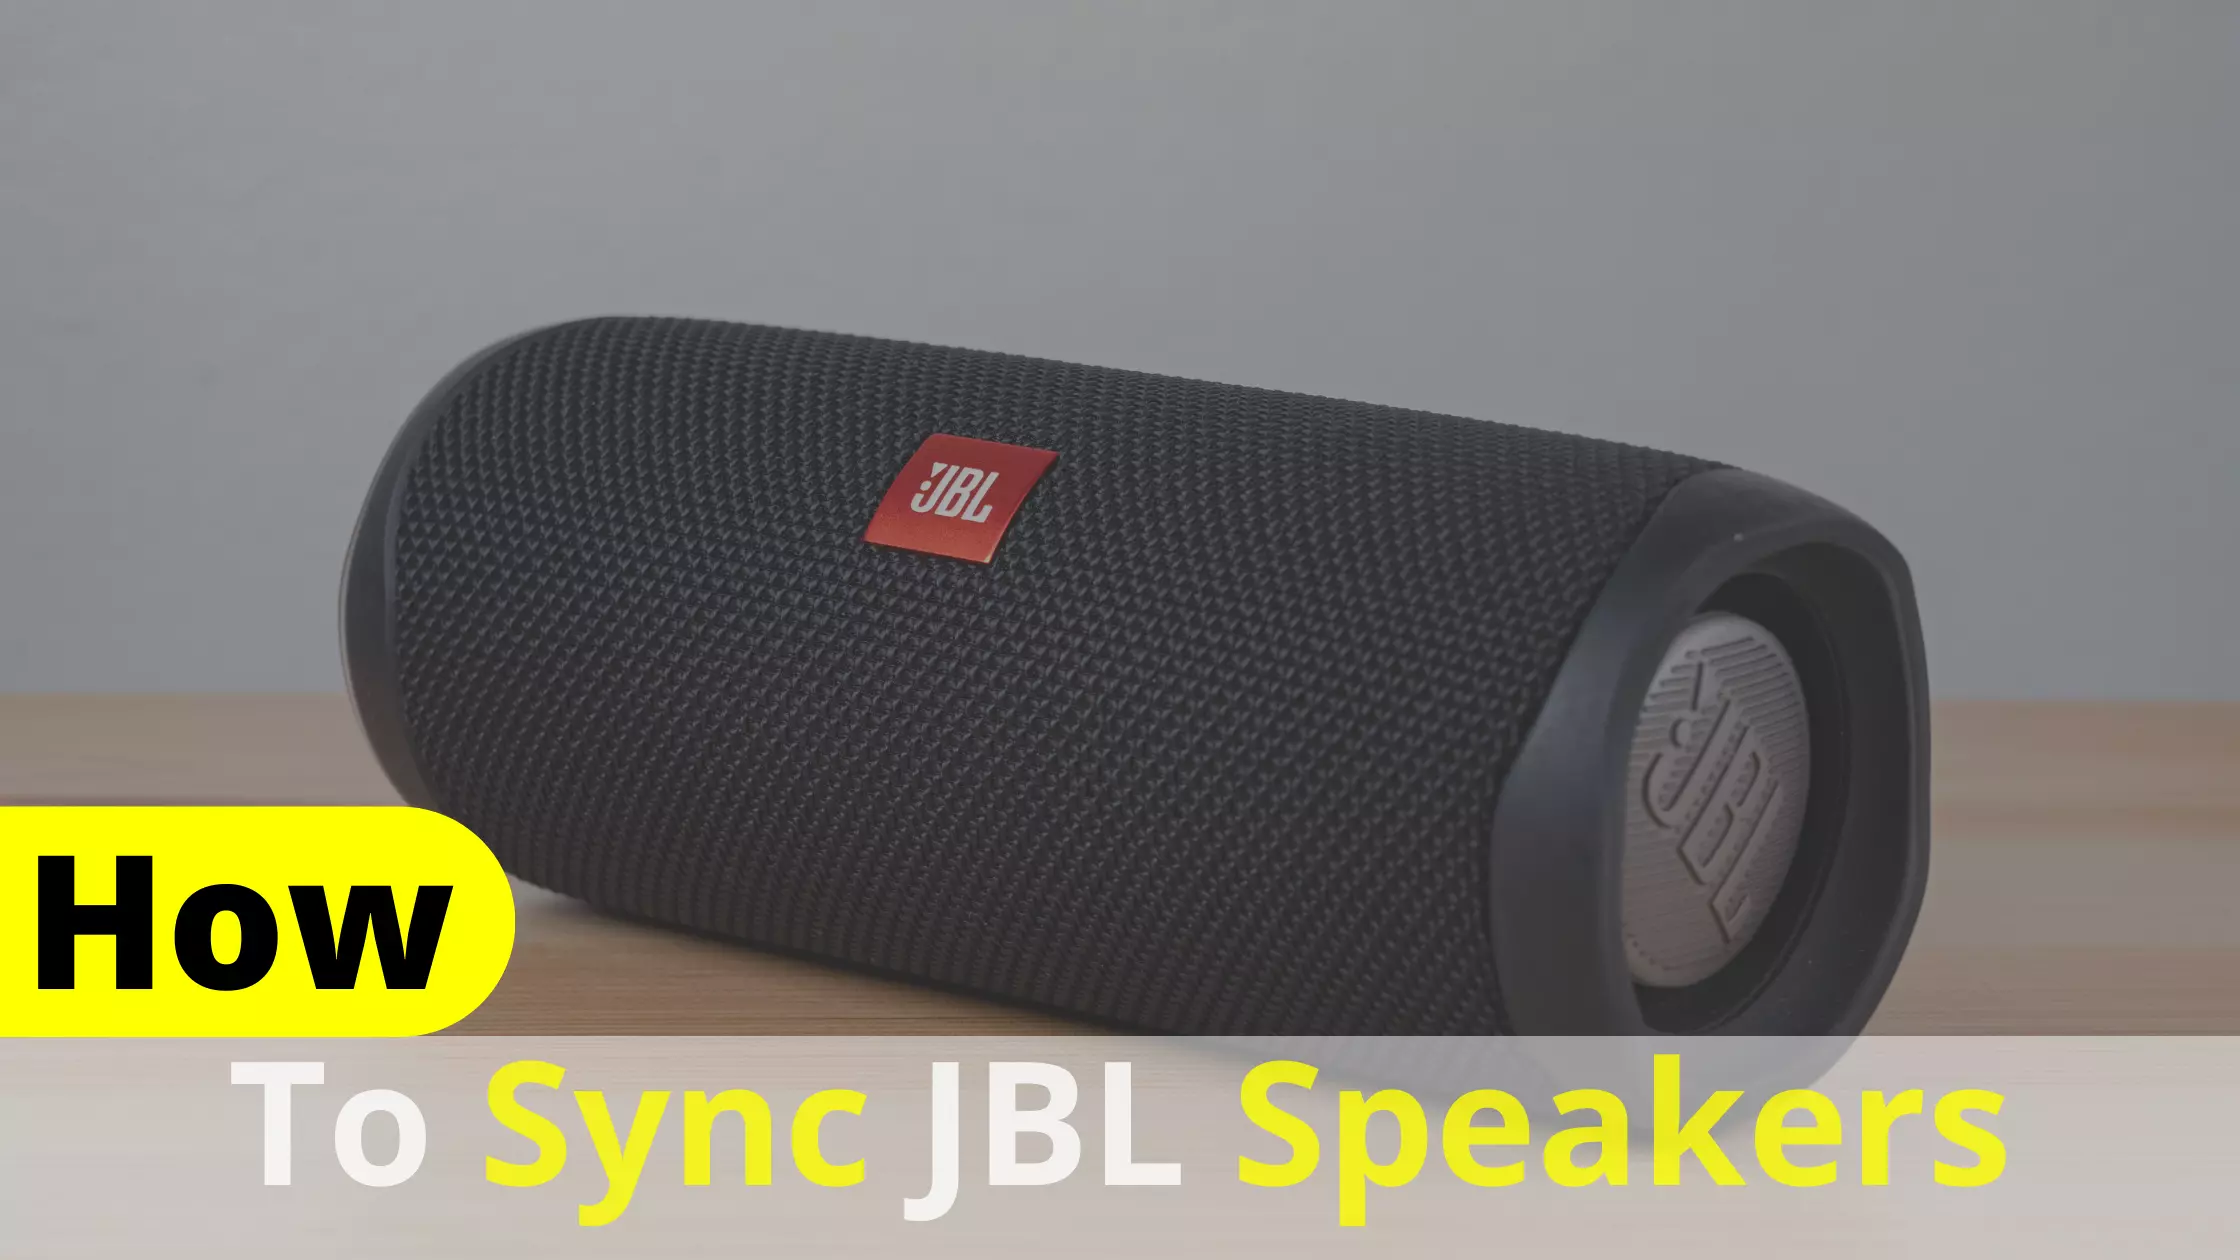 How To Sync Jbl Speakers? Ultimate Guide